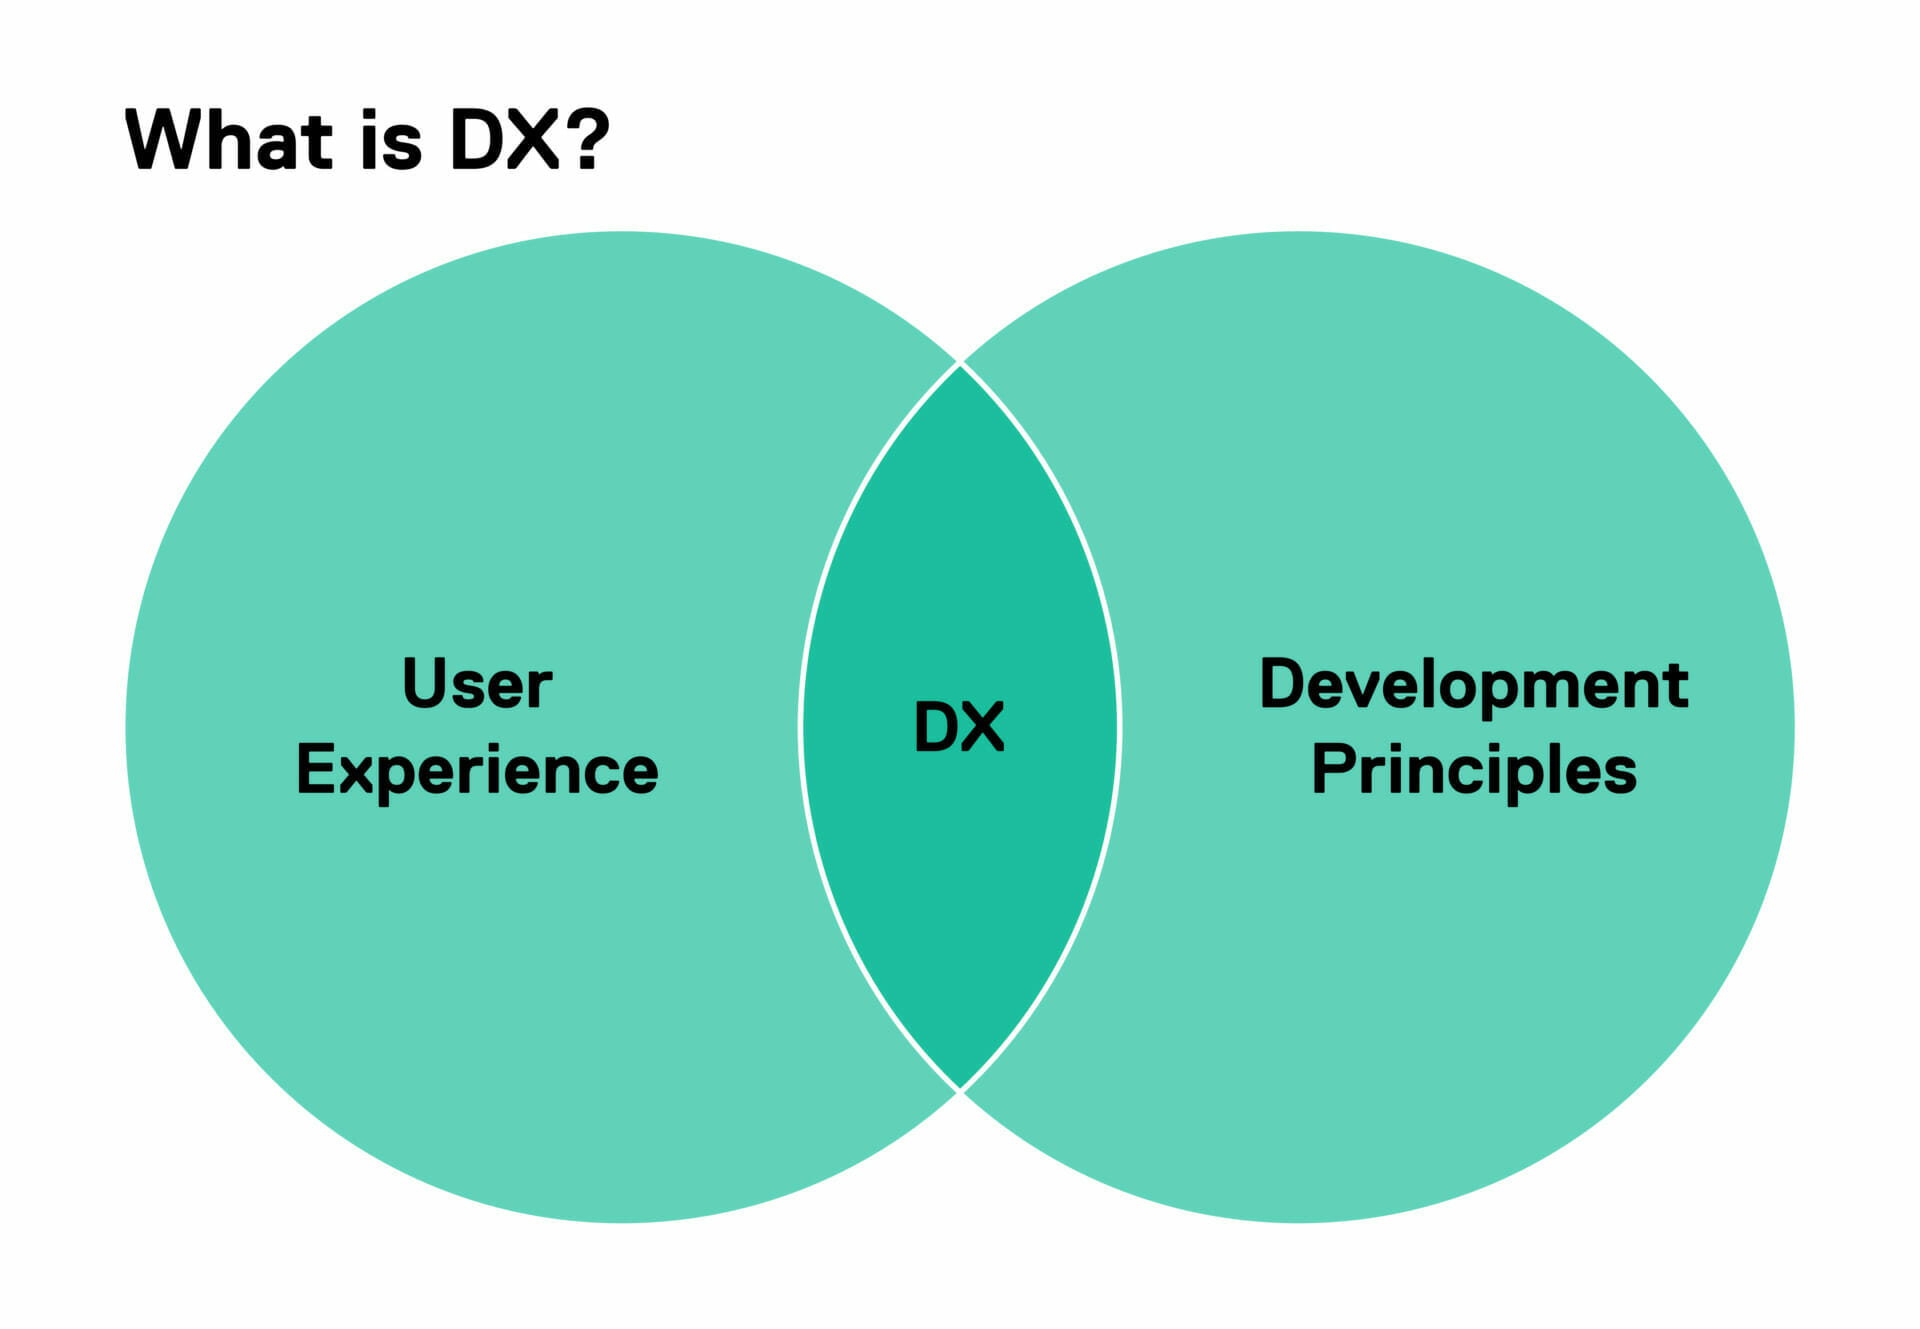 What is Developer Experience DX